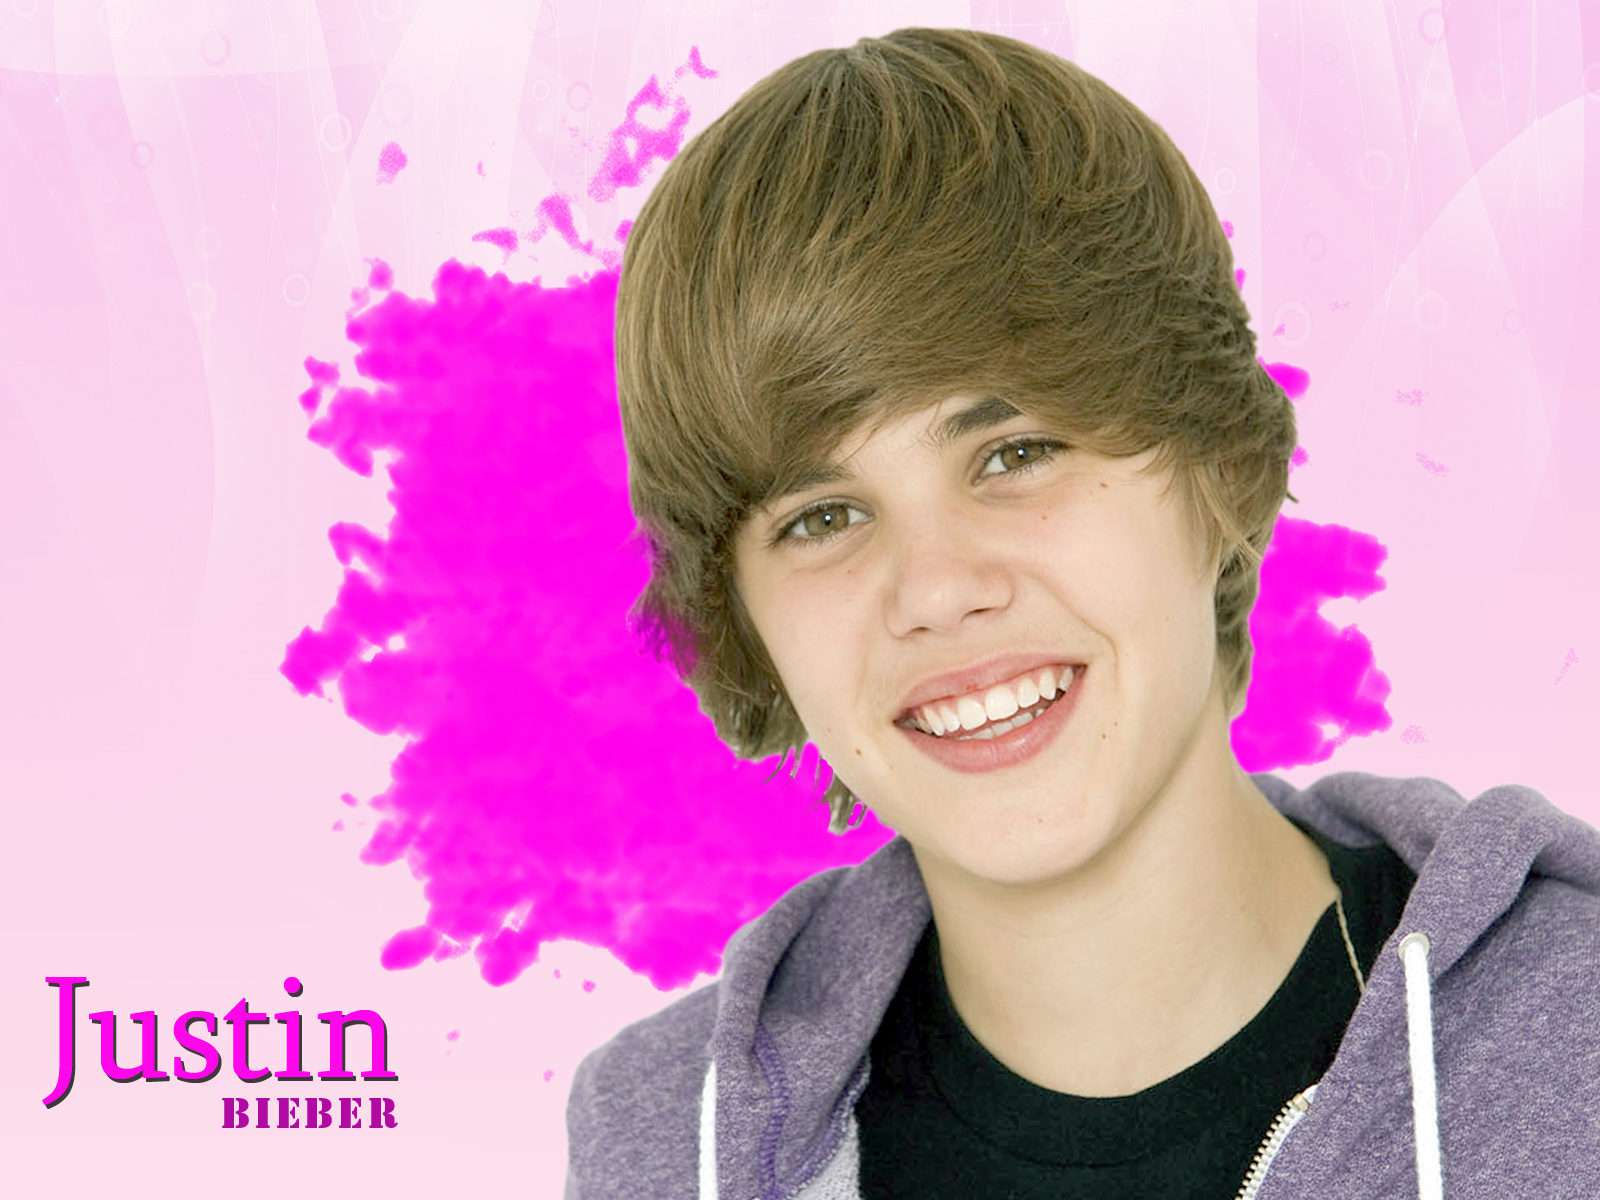 justin bieber 4 1080p hd 1600x1200 hd wallpaper for wallpaper and download 10030